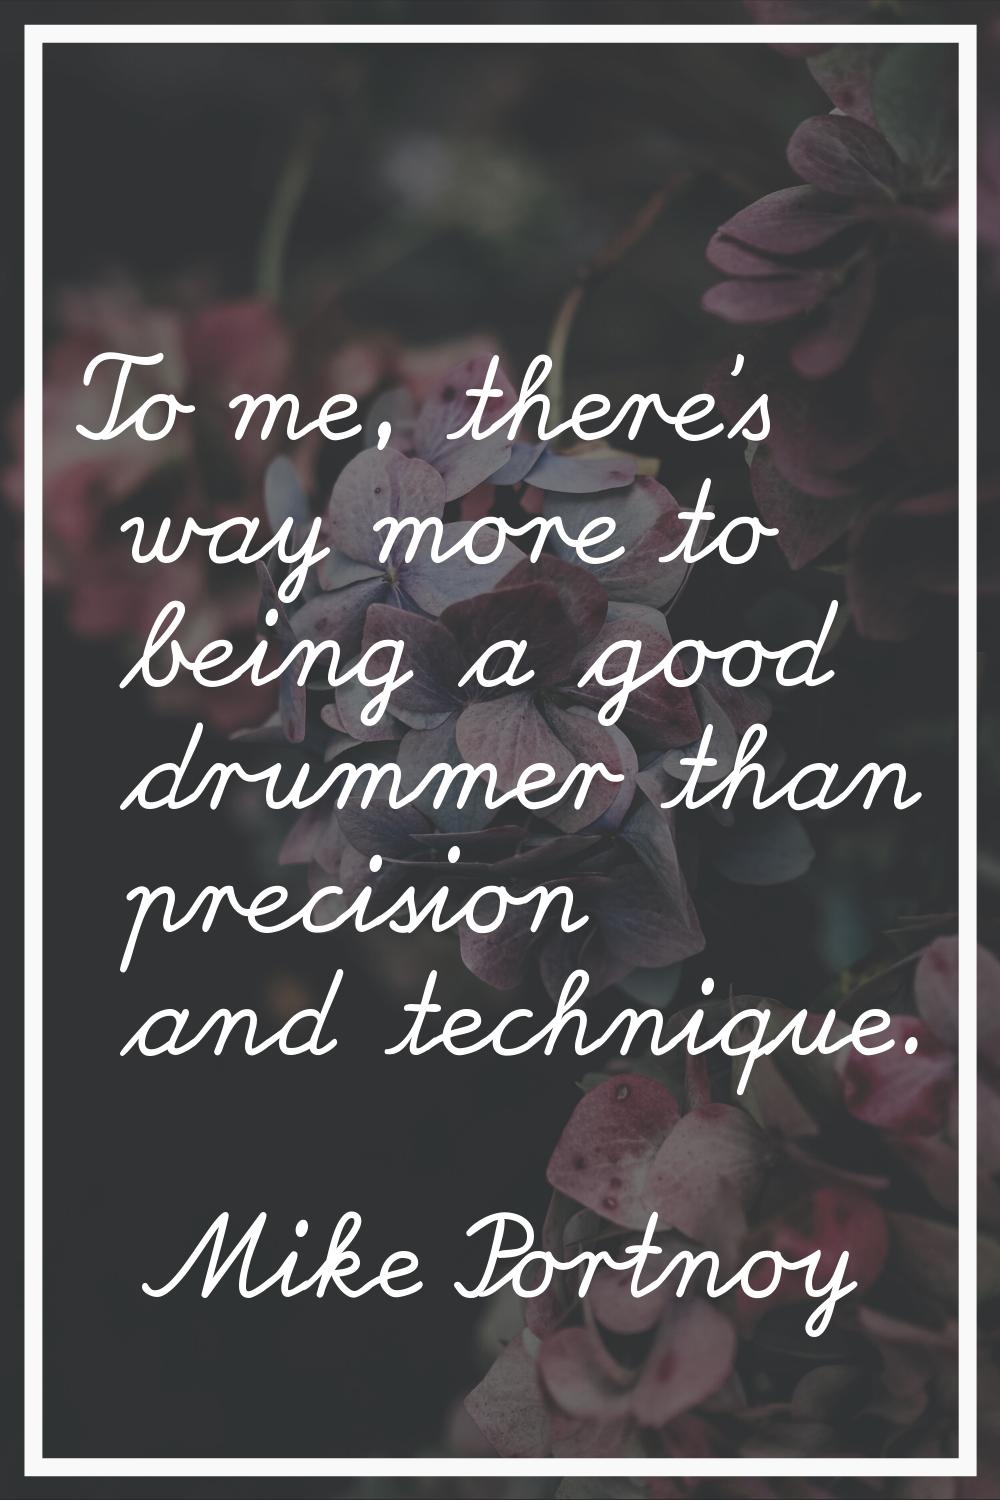 To me, there's way more to being a good drummer than precision and technique.